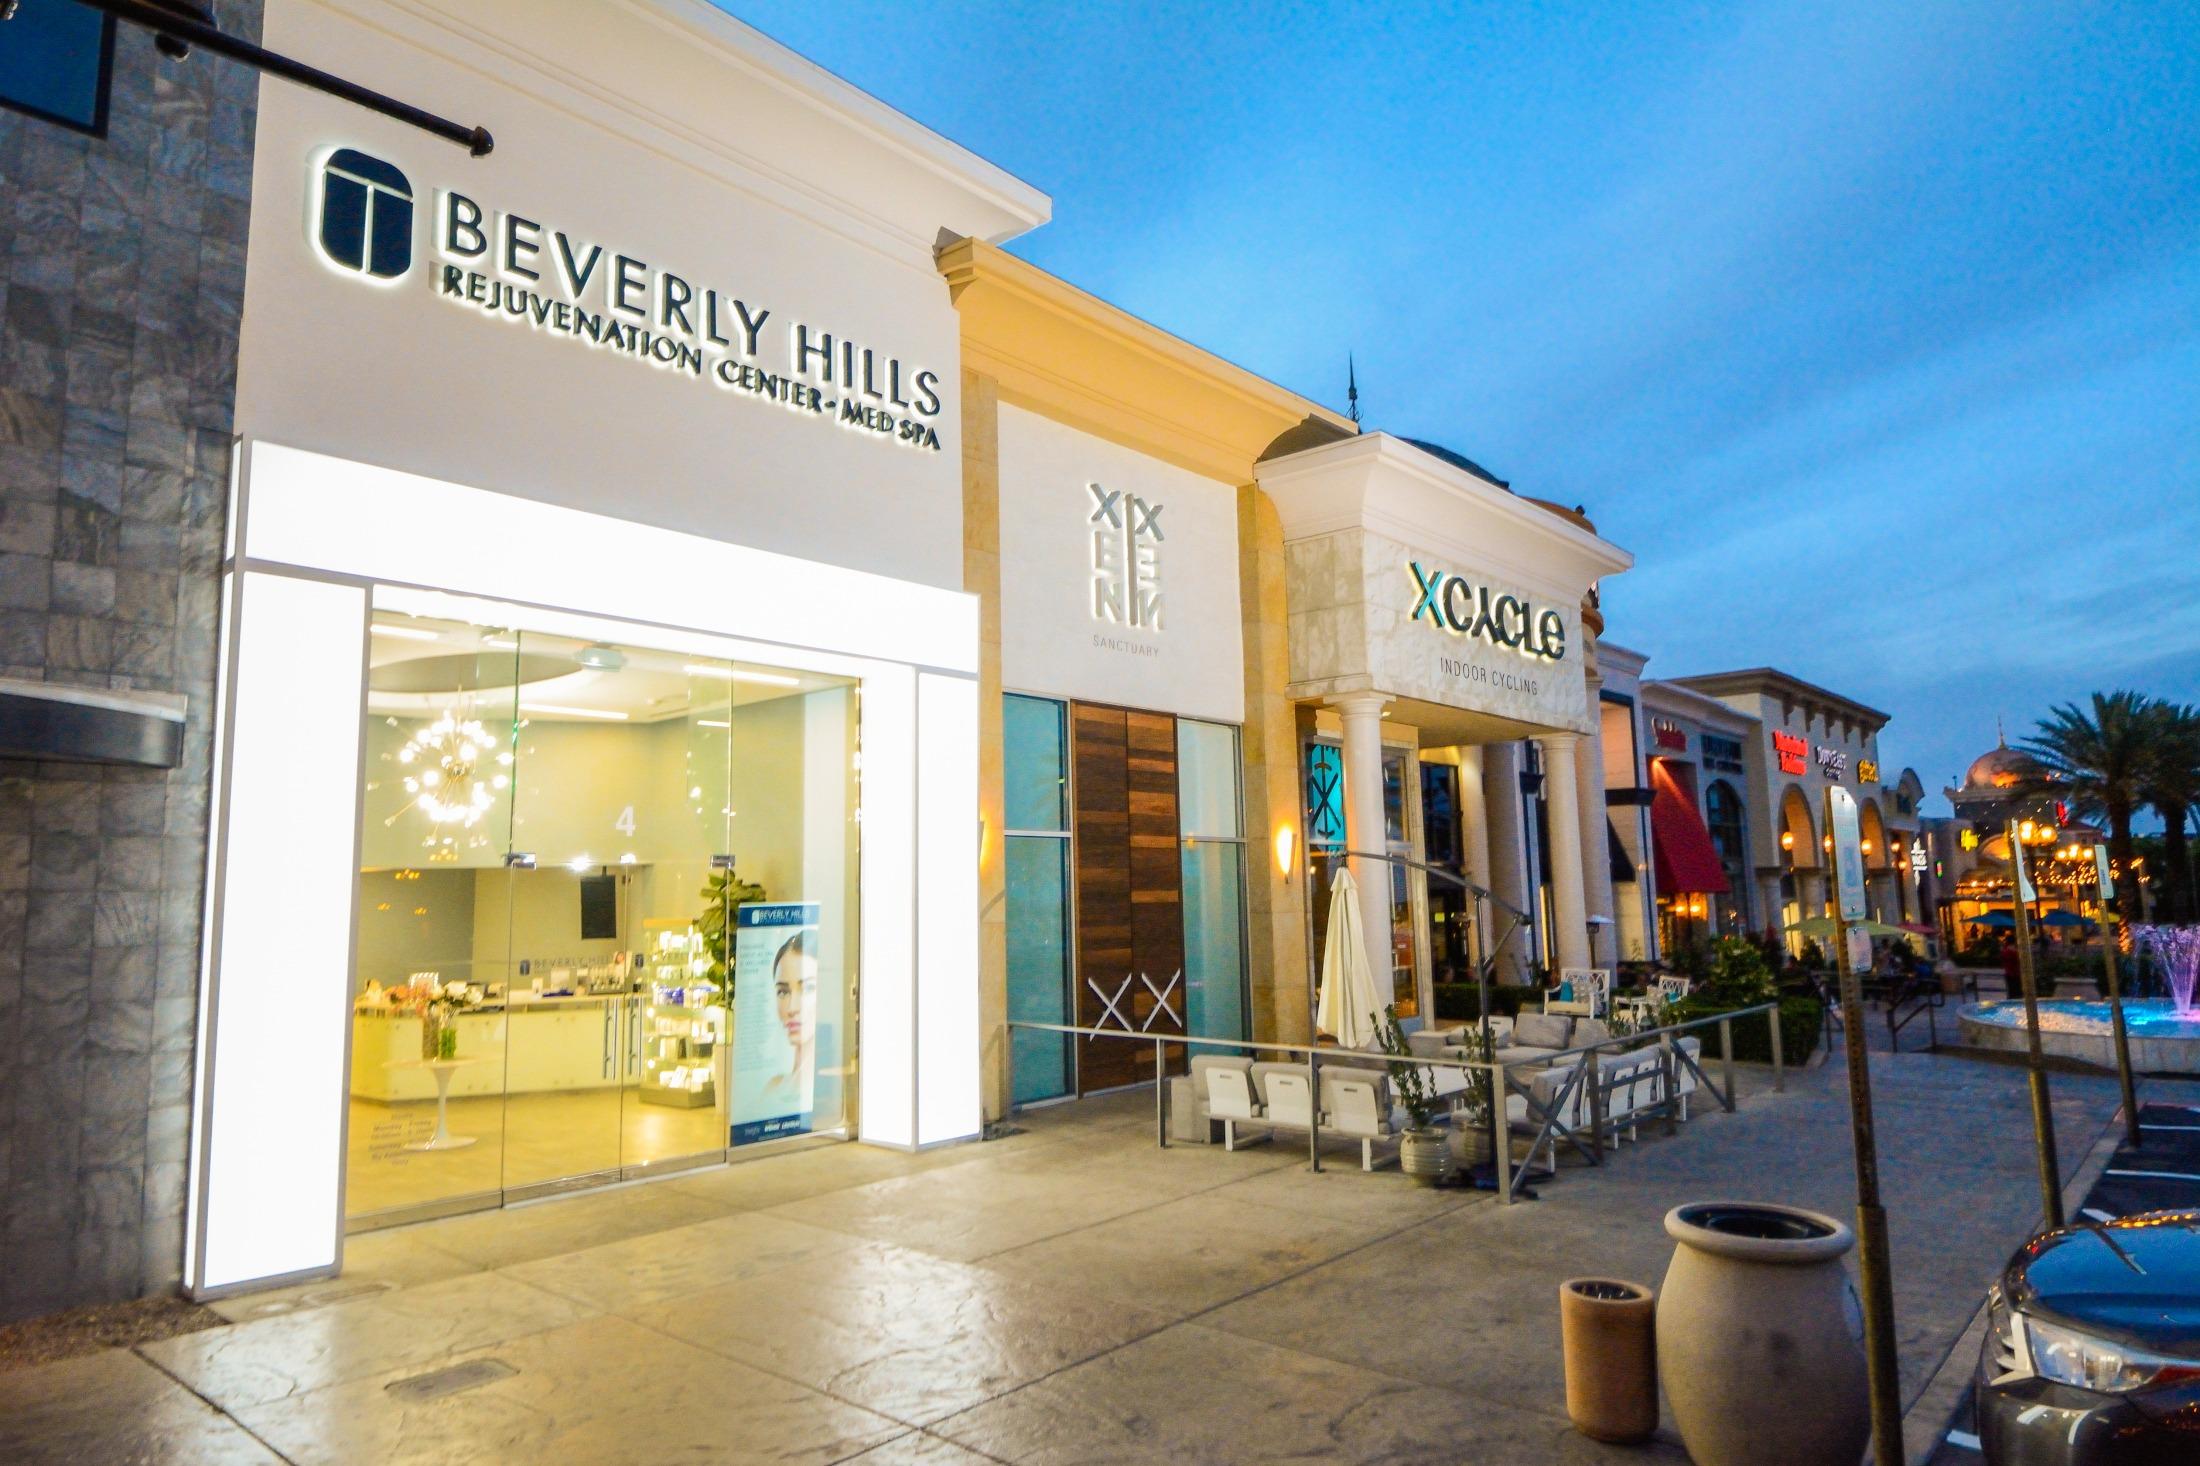 State-of-the-art medical spa, Beverly Hills Rejuvenation Center in Boca Park offers a beautiful facility for popular services like Botox, laser hair removal, PRP and so much more.United States14165856Boca ParkWeekend services by appointment only.Las Vegas750 S. Rampart BlvdSuite 489145NVBeverly Hills Rejuvenation CenterBeverly Hills Rejuvenation Centerinfolasvegas@bhrcenter.comMedical Spa with aesthetics and wellness services.https://www.bhrcenter.com(702) 819-9221https://bhrcenter.com/nv/las-vegas-medical-spa/